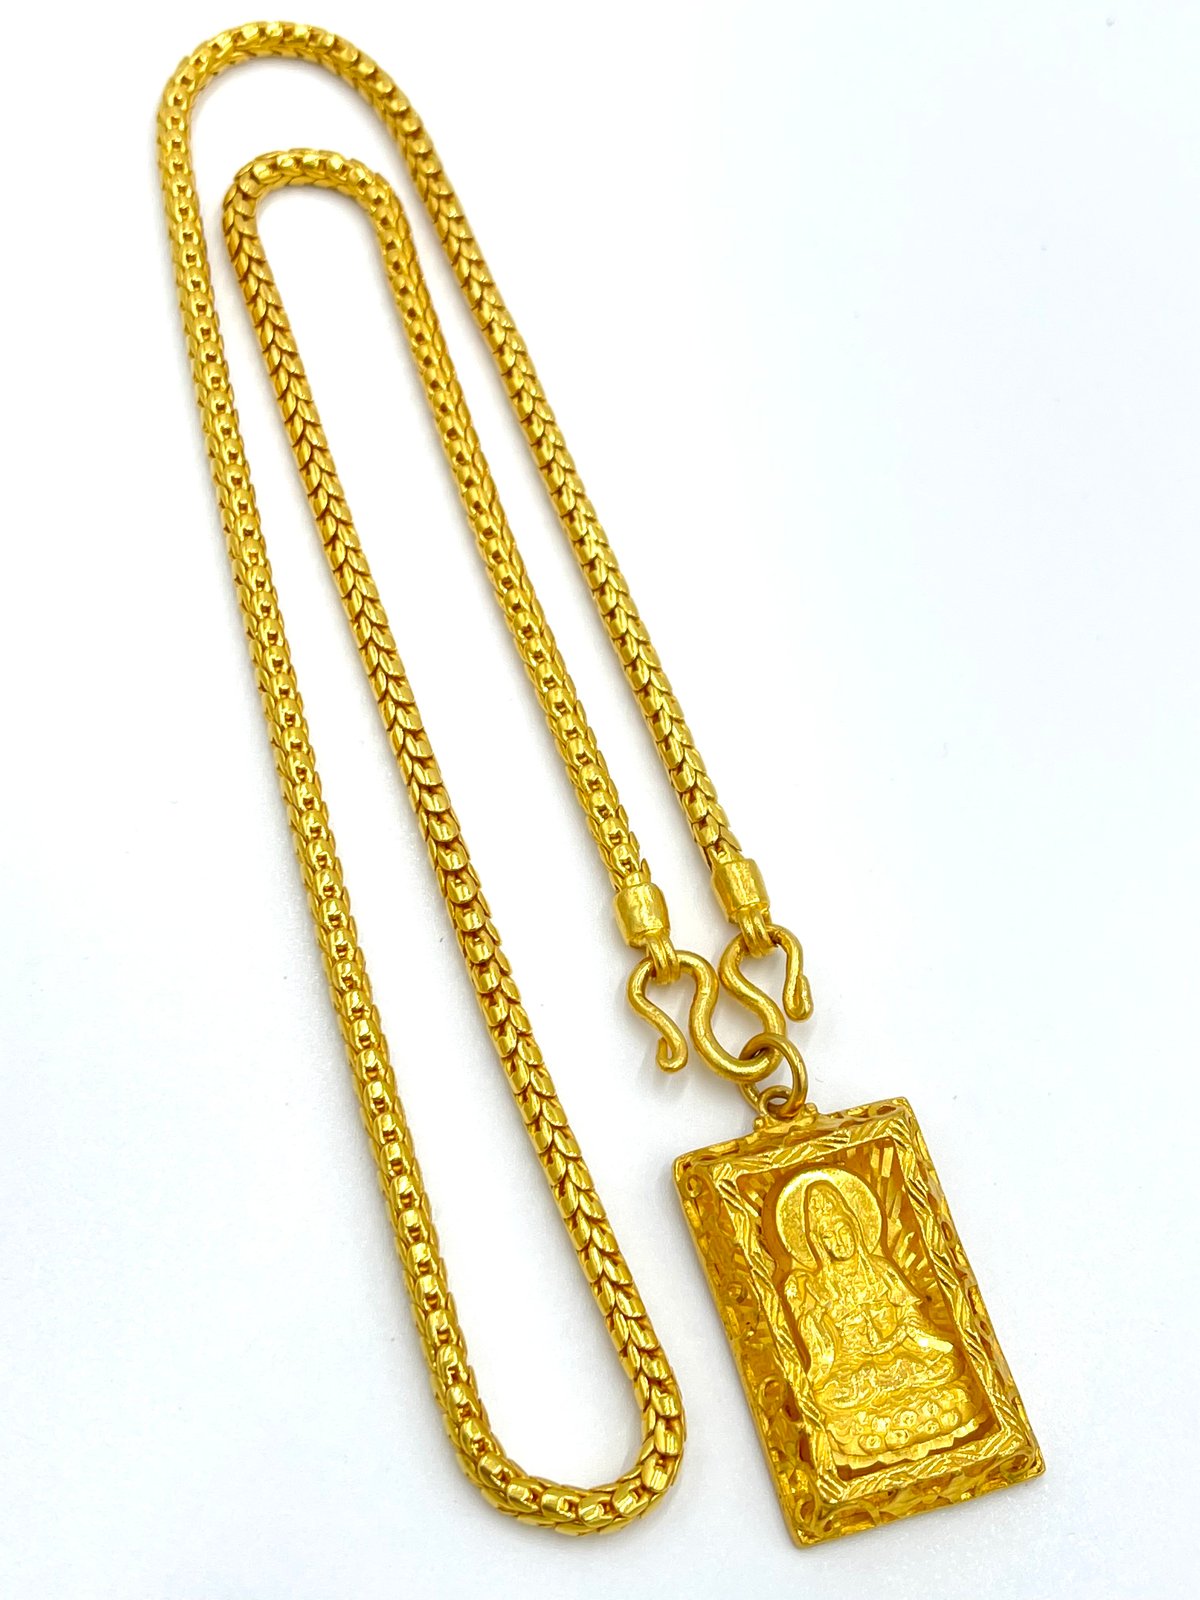 24k gold chain, 75 grams for Sale in Saint Paul, MN - OfferUp